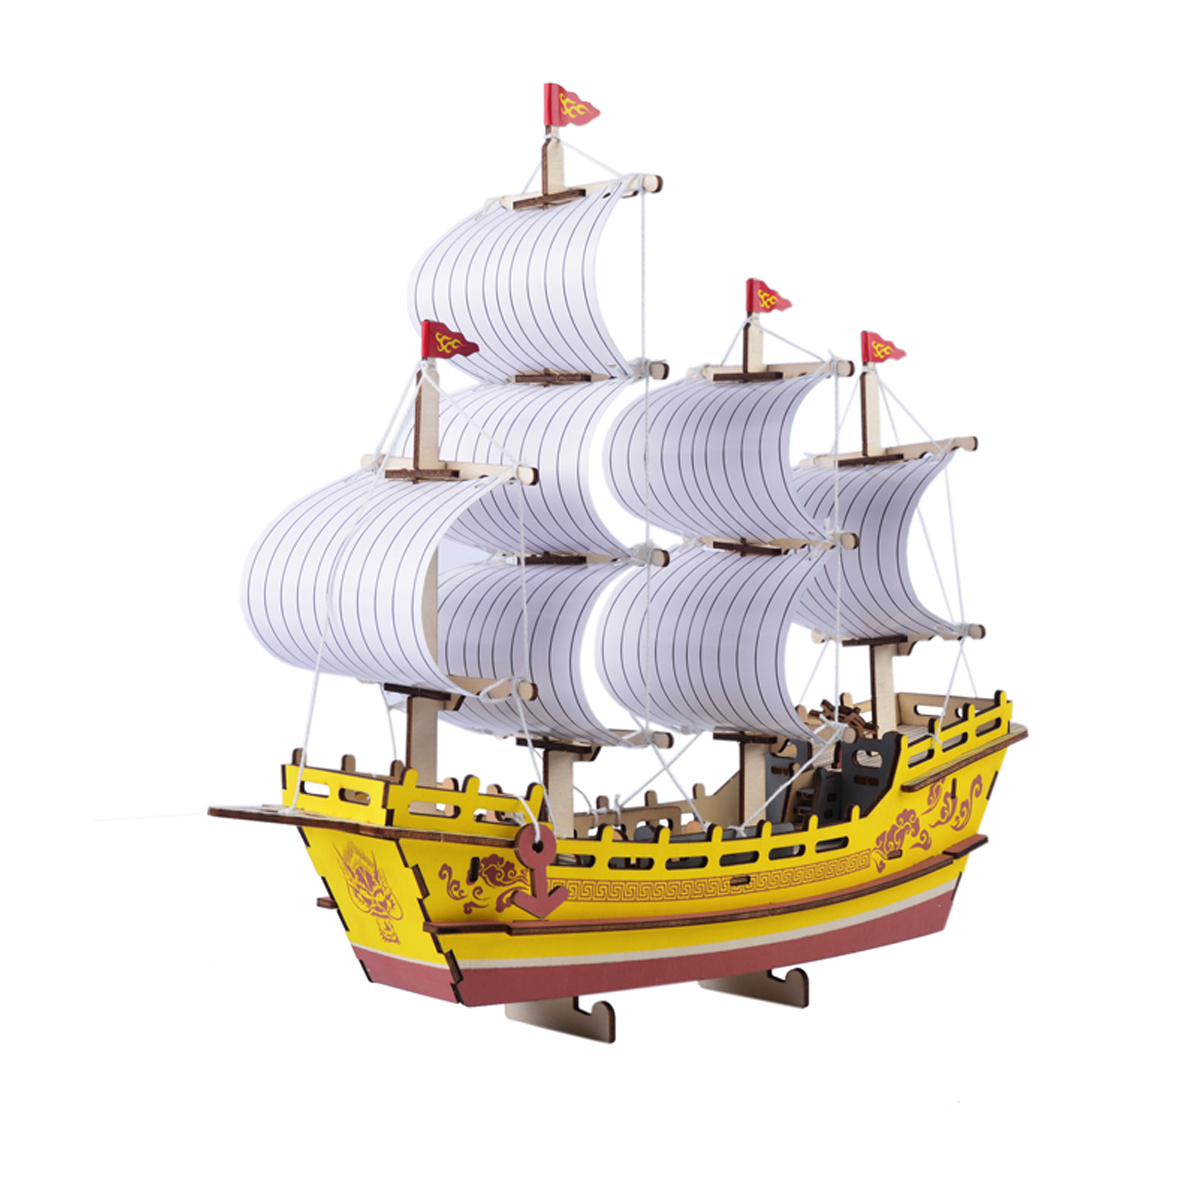 3D-Woodcraft-Assembly-Sailing-Series-Kit-Jigsaw-Puzzle-Decoration-Toy-Model-for-Kids-Gift-1635638-4